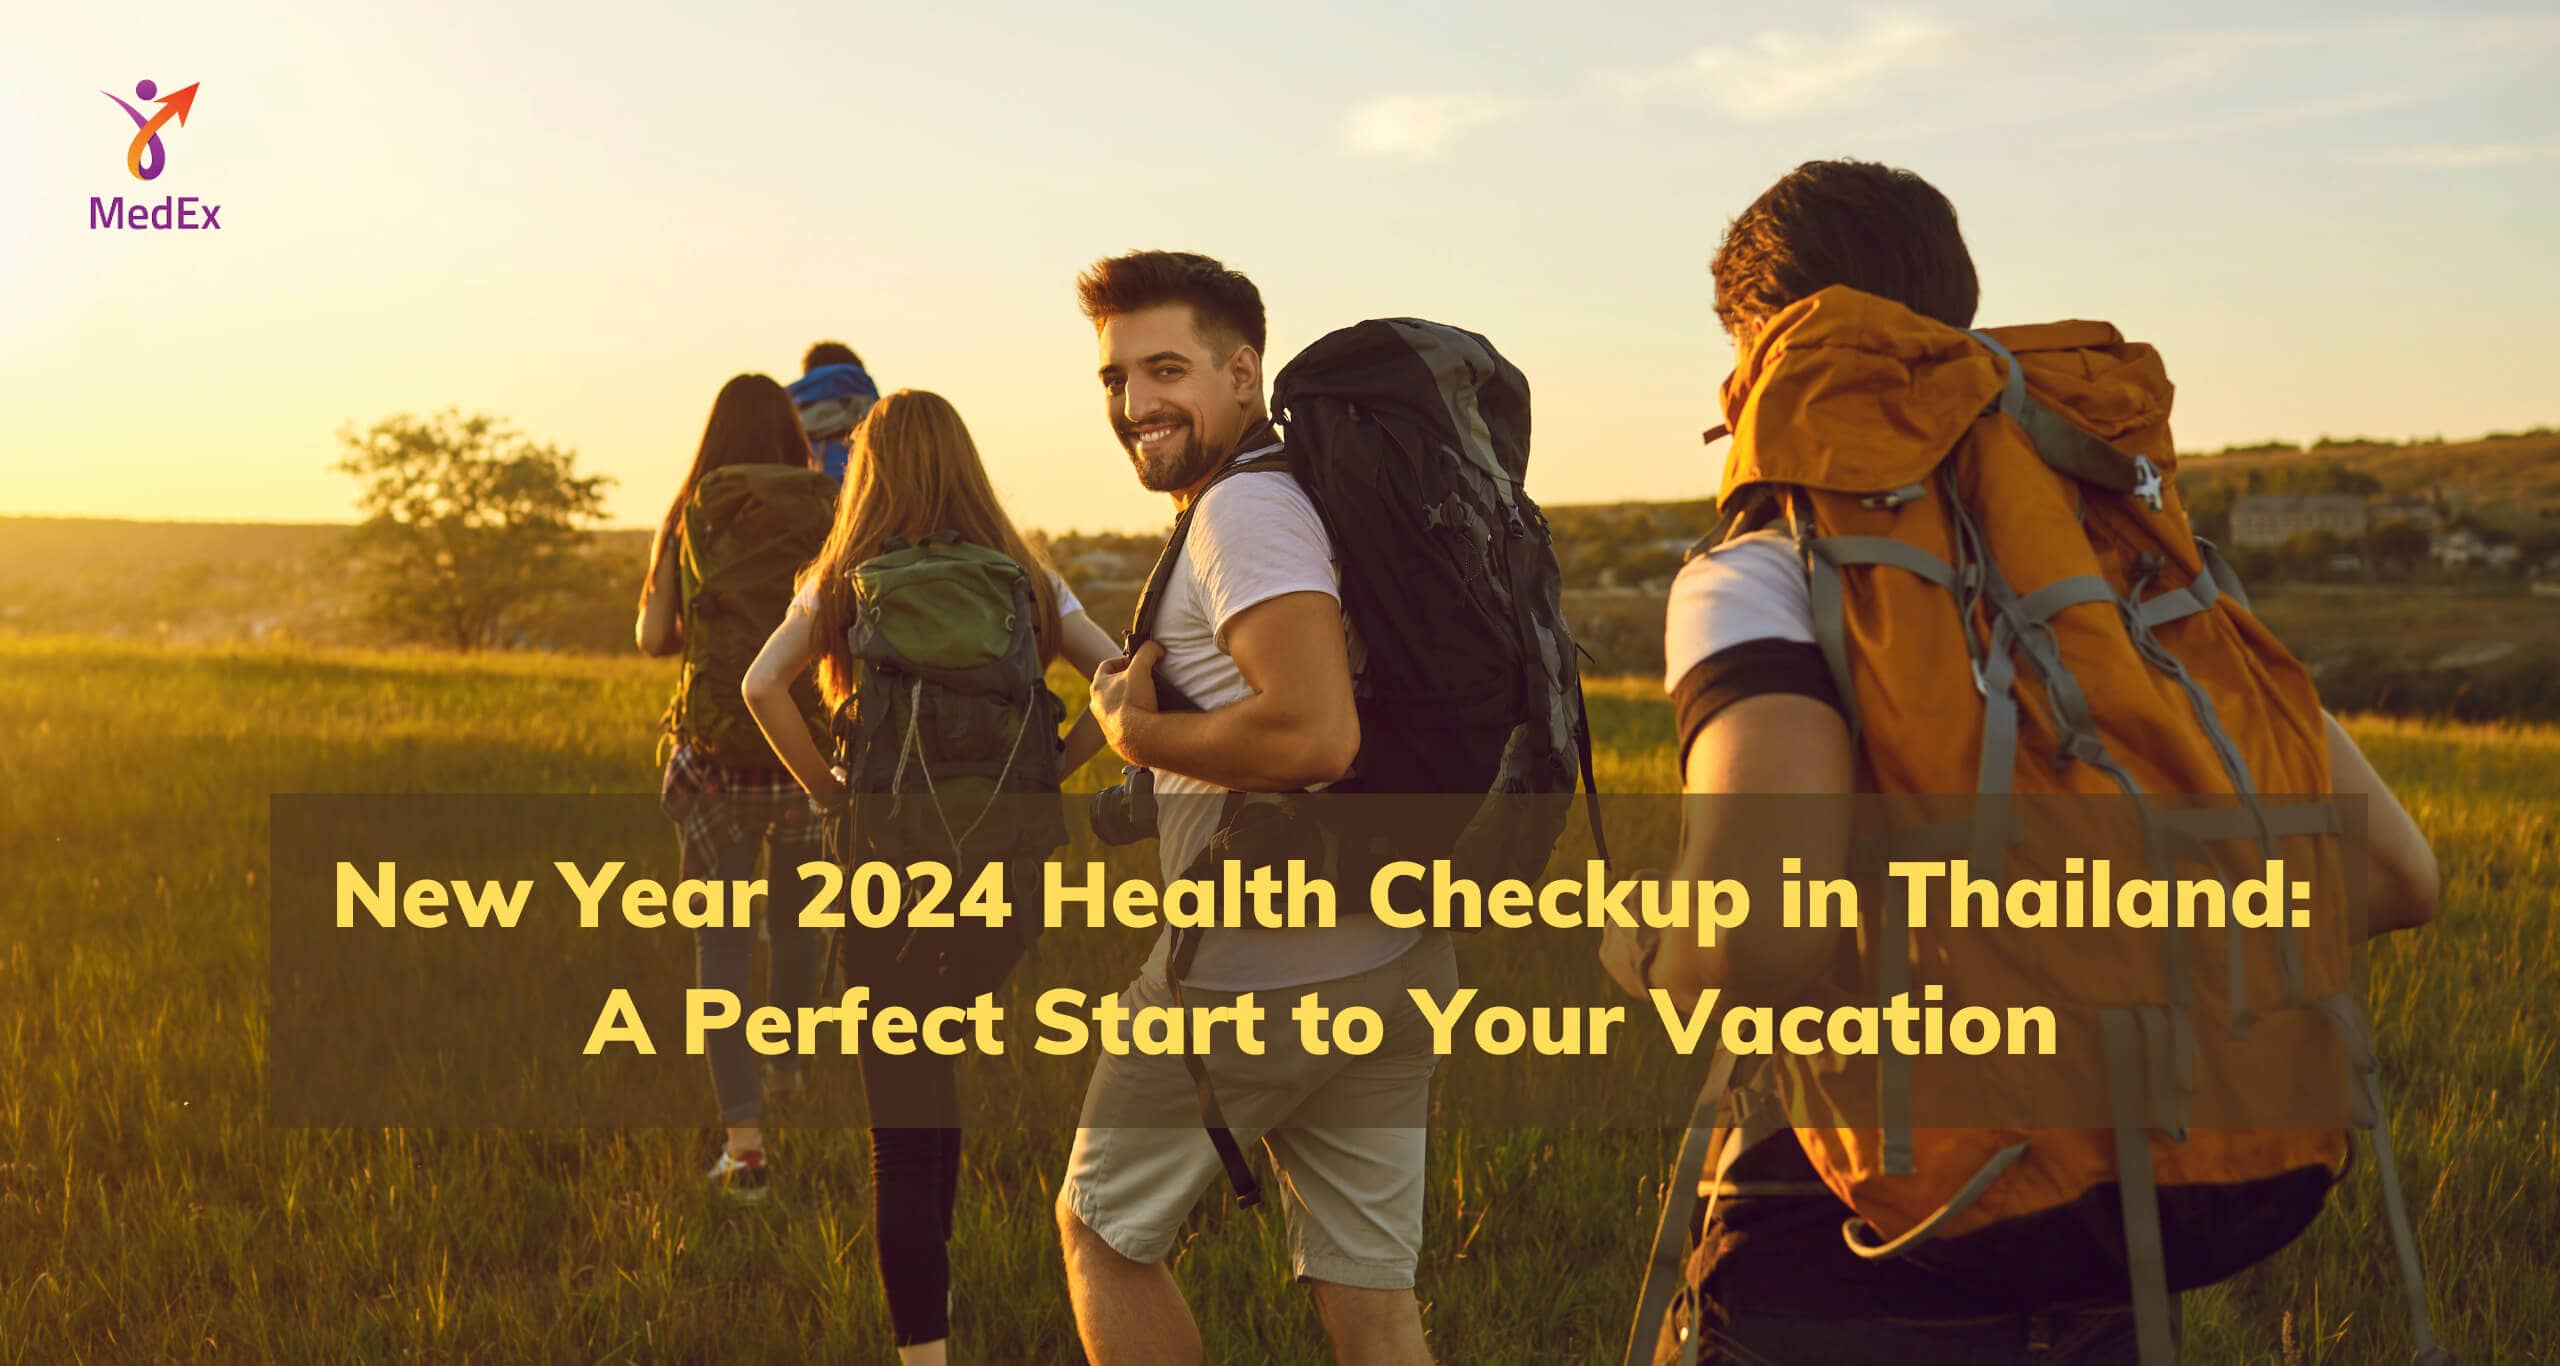 New Year 2024 Health Checkup in Thailand: A Perfect Start to Your Vacation